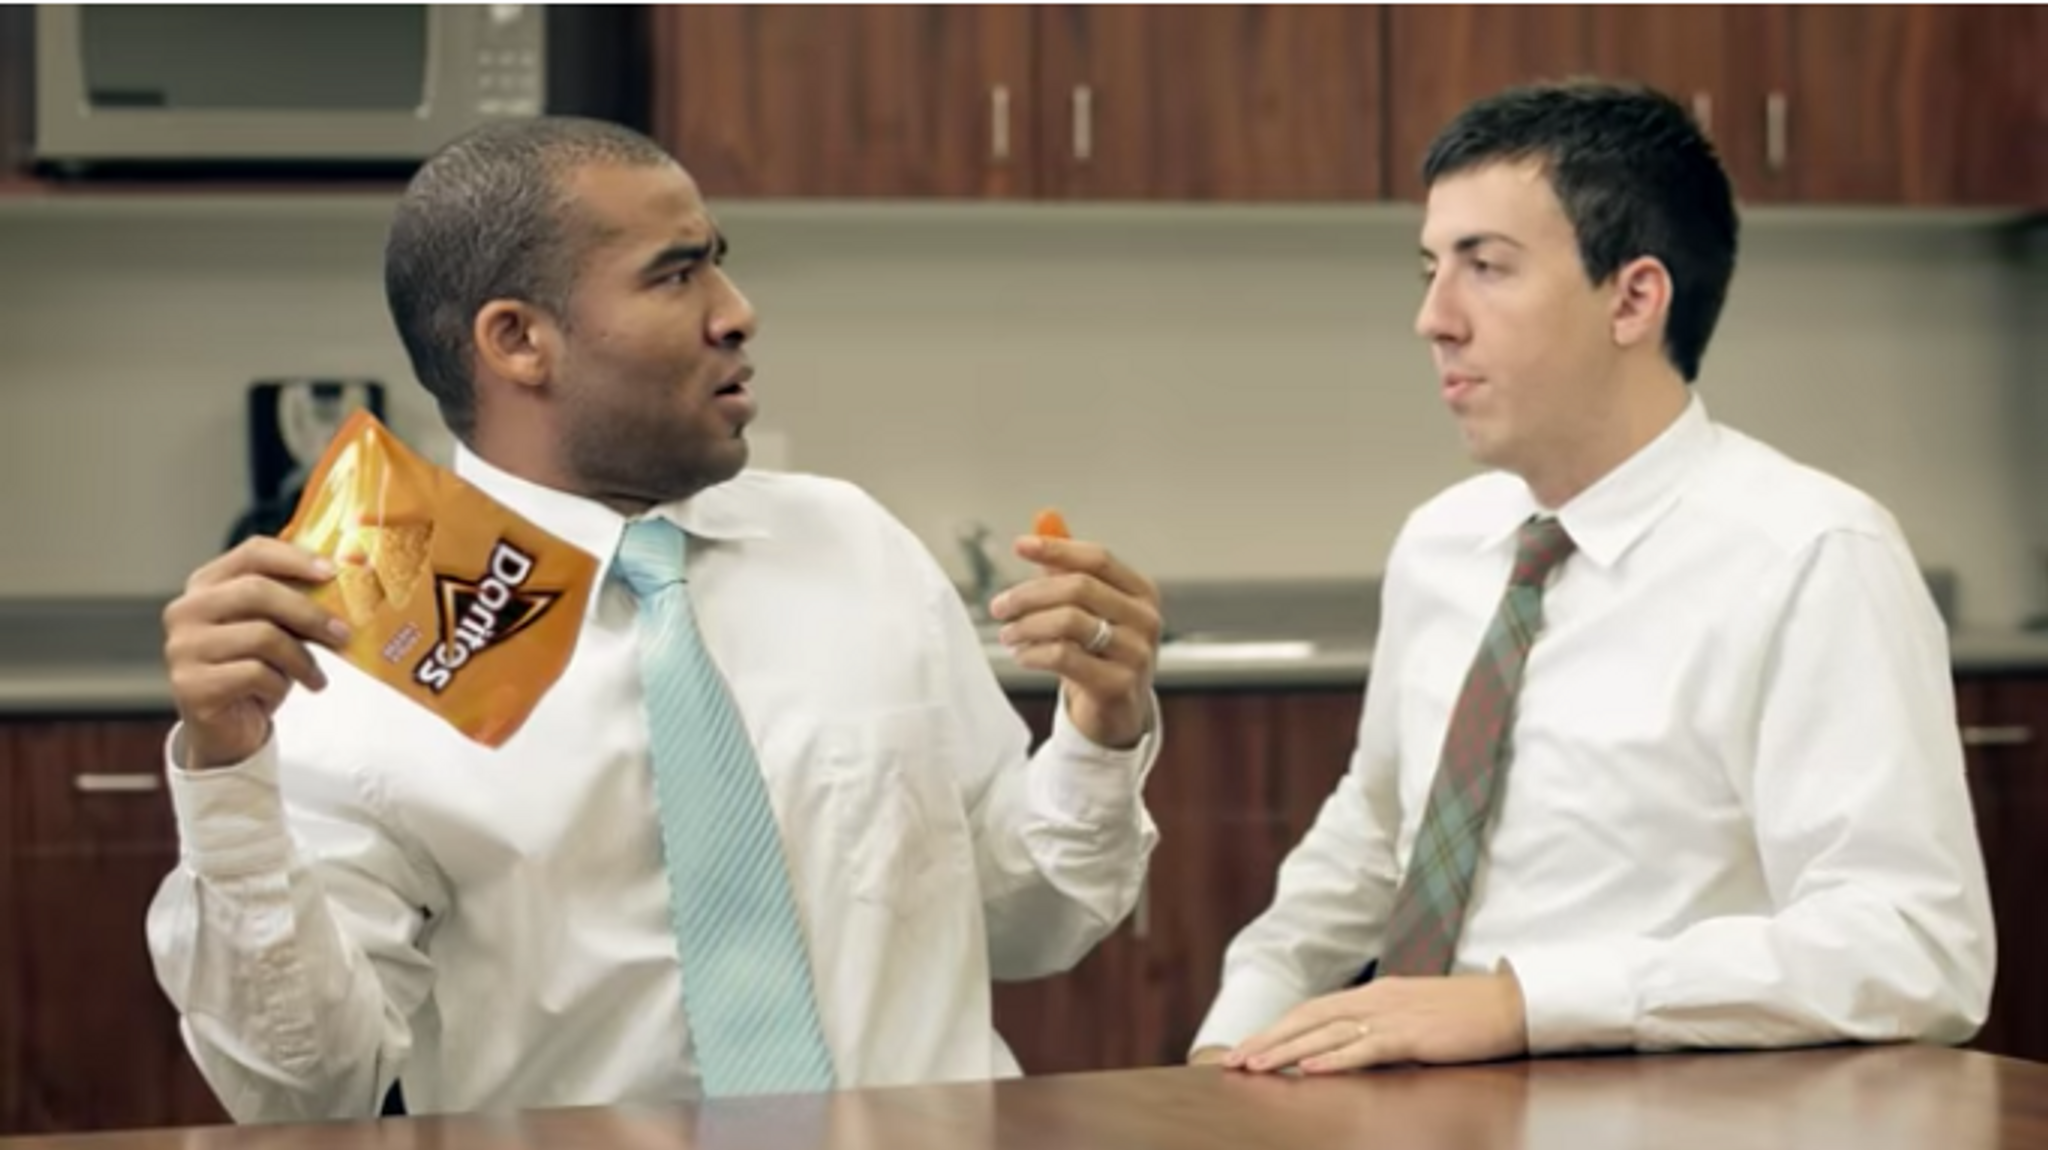 Doritos campaign taps the passion of the superfan